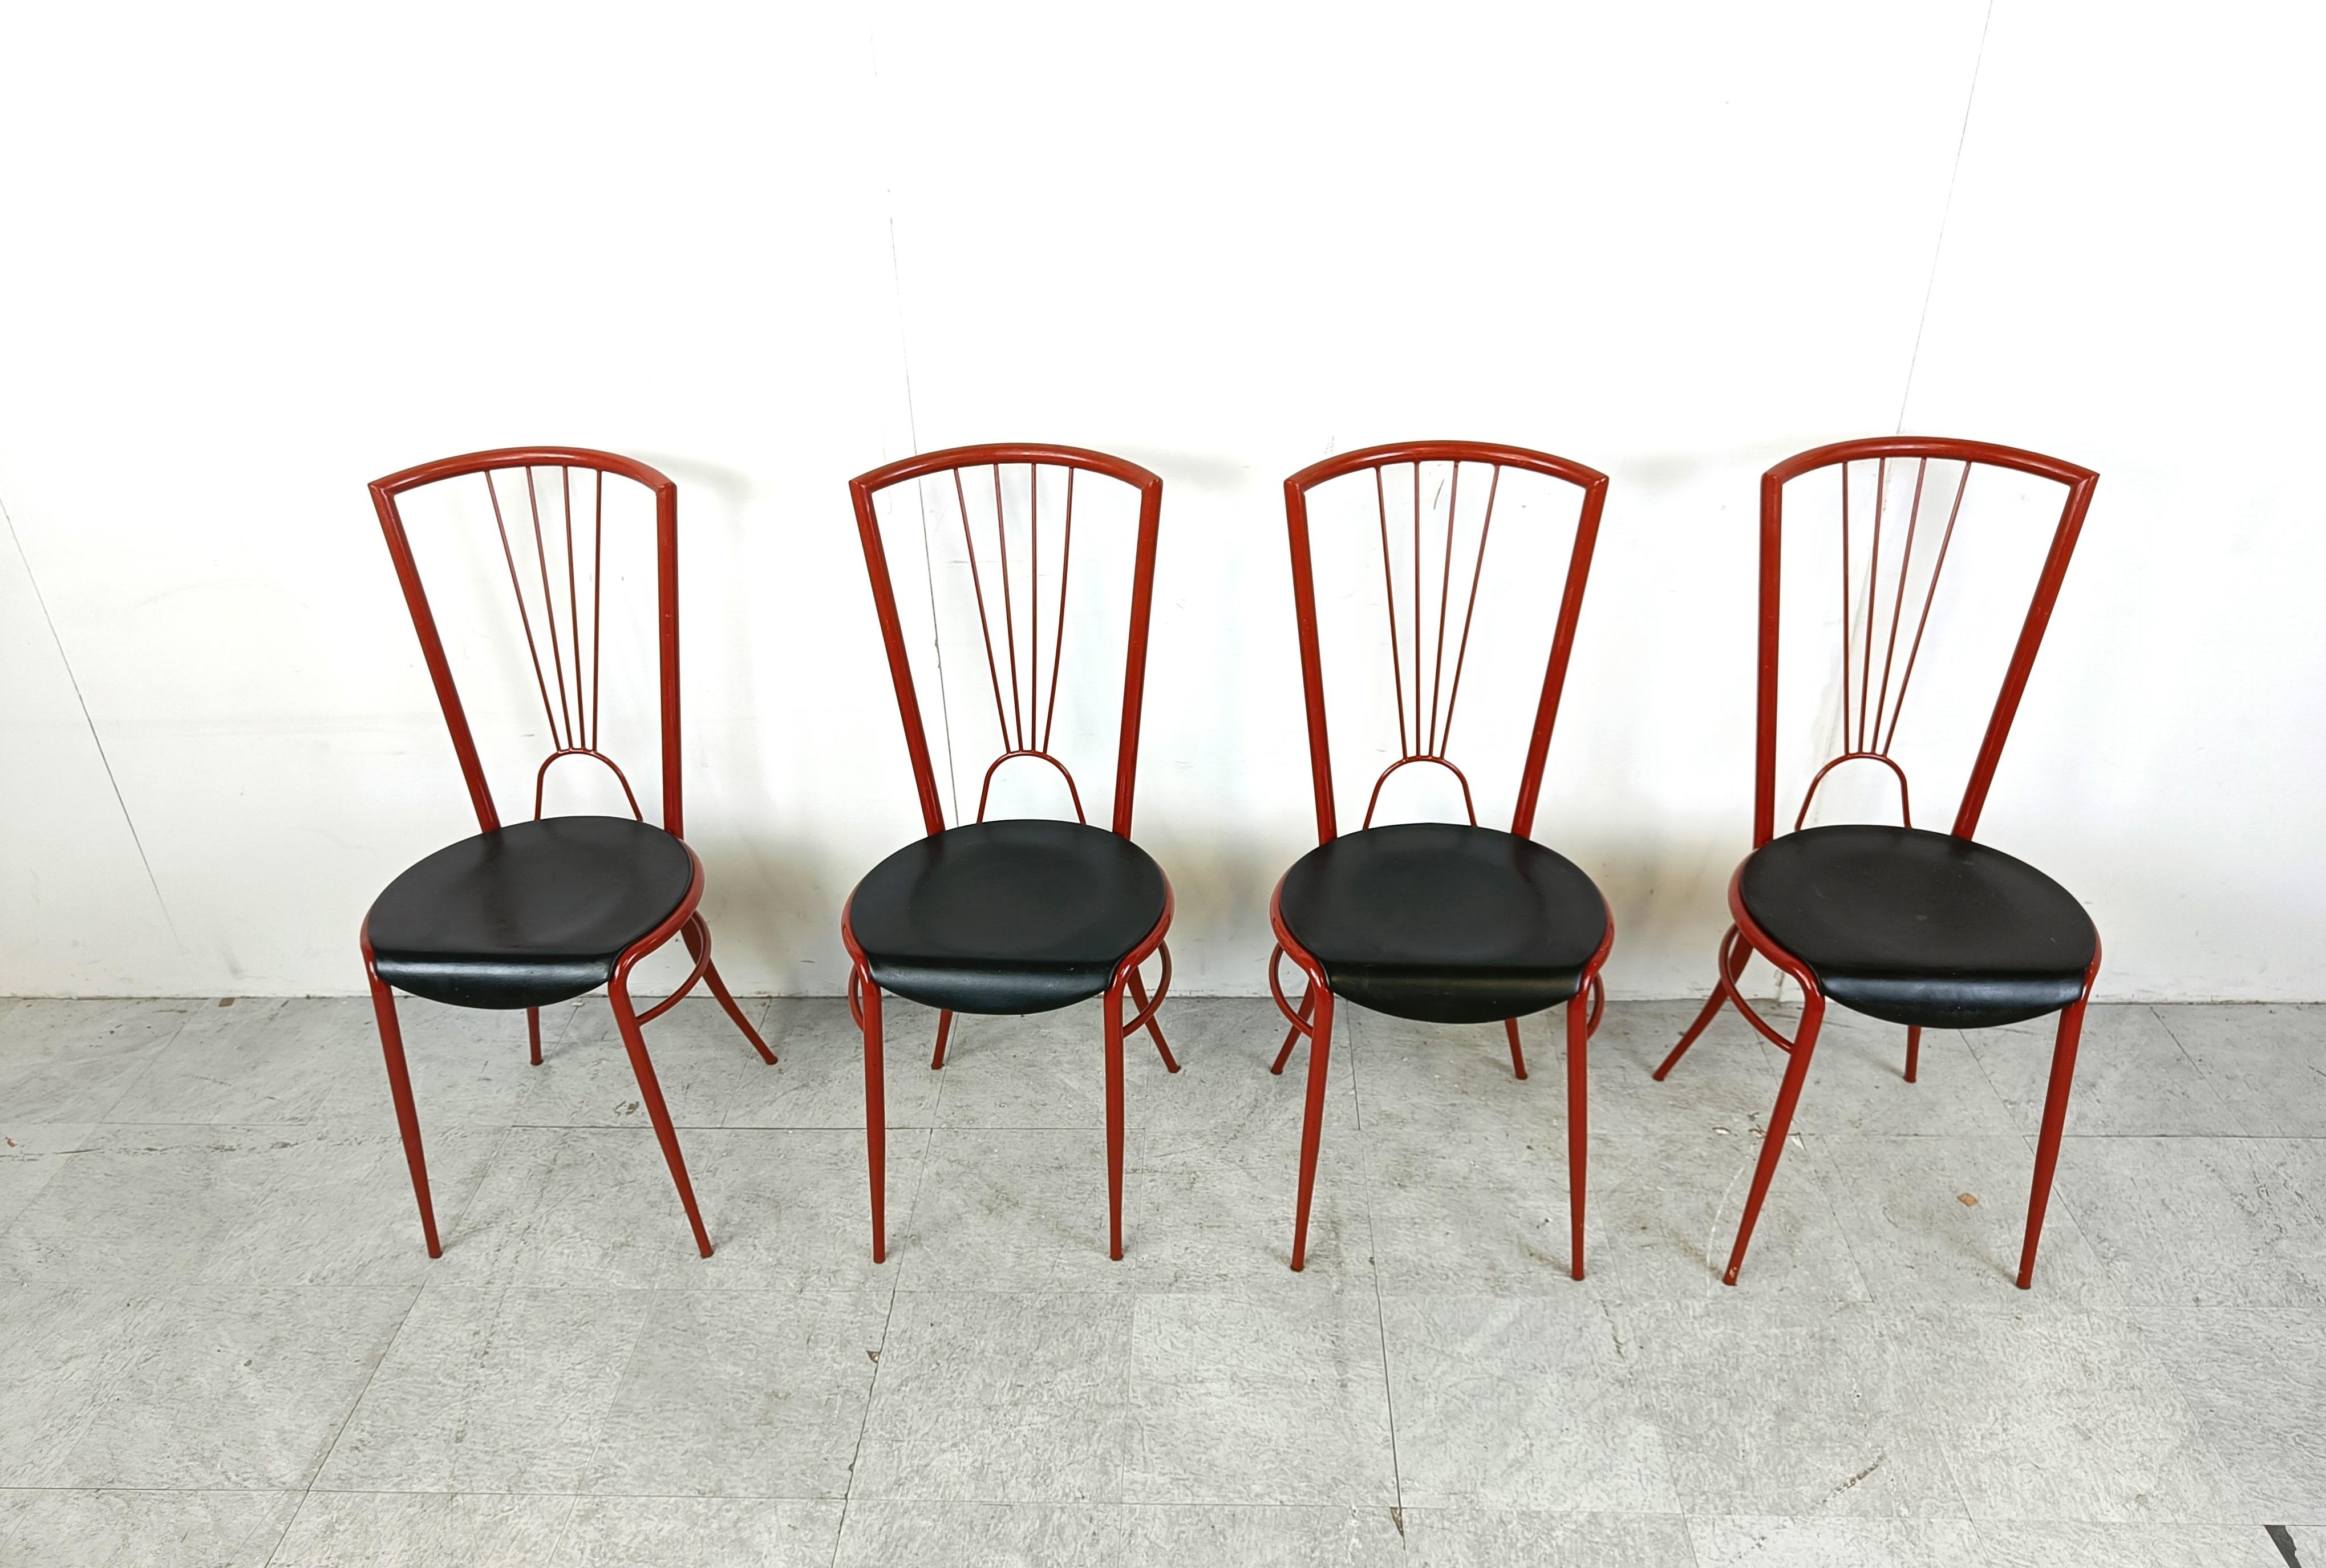 Set of 4 post modern dining chairs with an elegantly designed red metal frame with beautiful bent legs.

Black leatherette seats create a nice contrast with the red frames.

Very good condition

1980s -Italy

Dimensions:
Height: 93cm/36.61